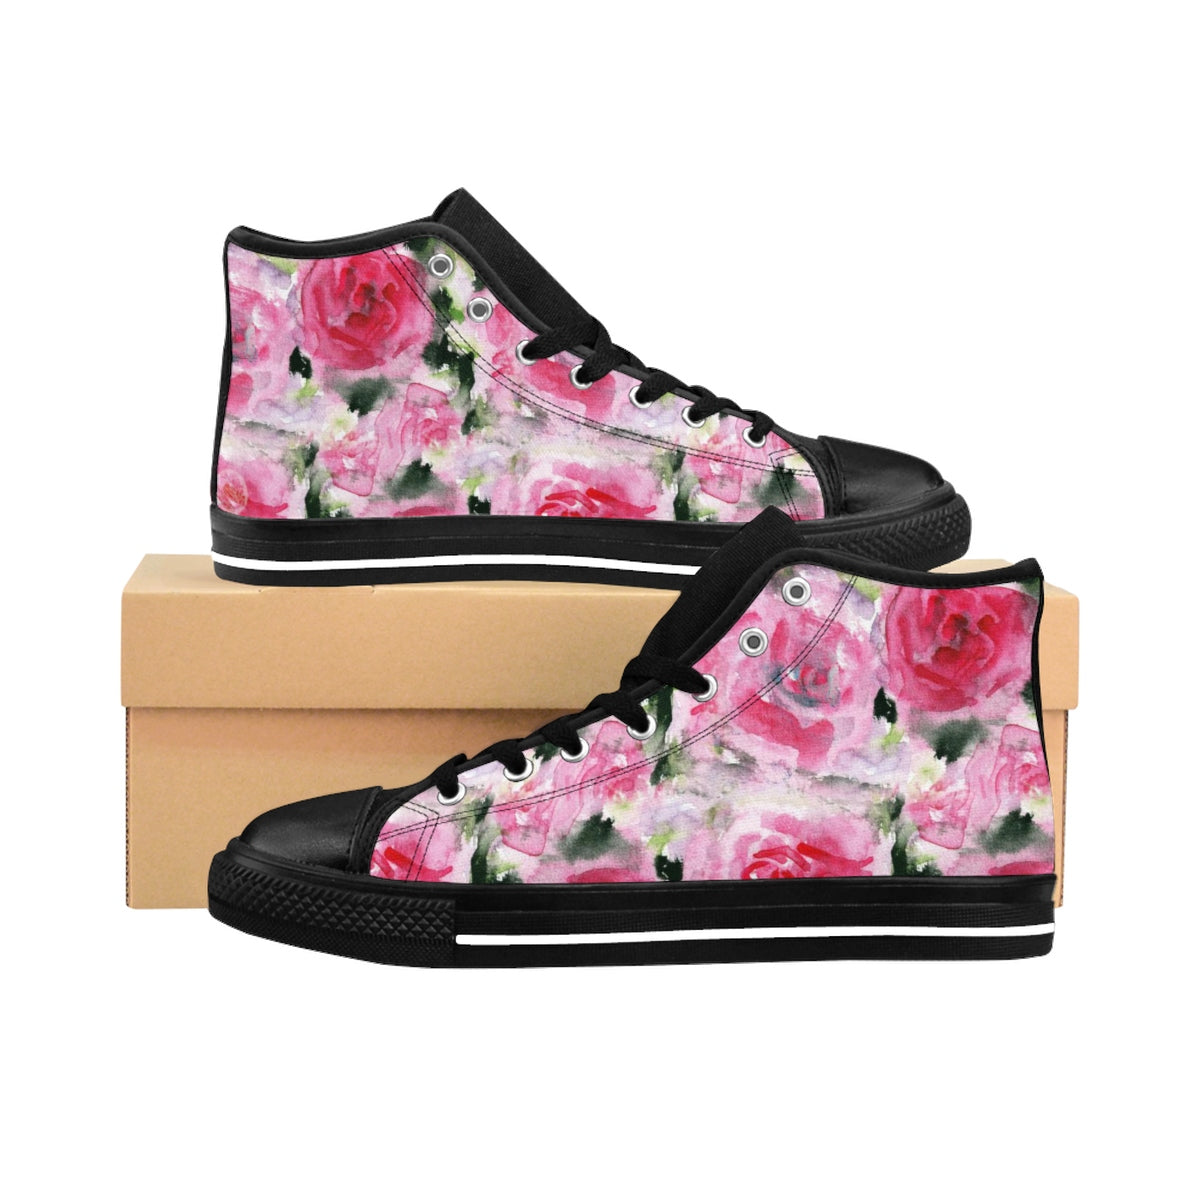 Pink Abstract Rose Floral Print Pink Designer Women's High Top Sneakers (US Size: 6-12)-Women's High Top Sneakers-US 9-Heidi Kimura Art LLC Pink Rose Women's Sneakers, Feminine Sporty Modern Pink Abstract Rose Floral Print Pink Designer Women's High Top Sneakers Tennis Running Shoes (US Size: 6-12)